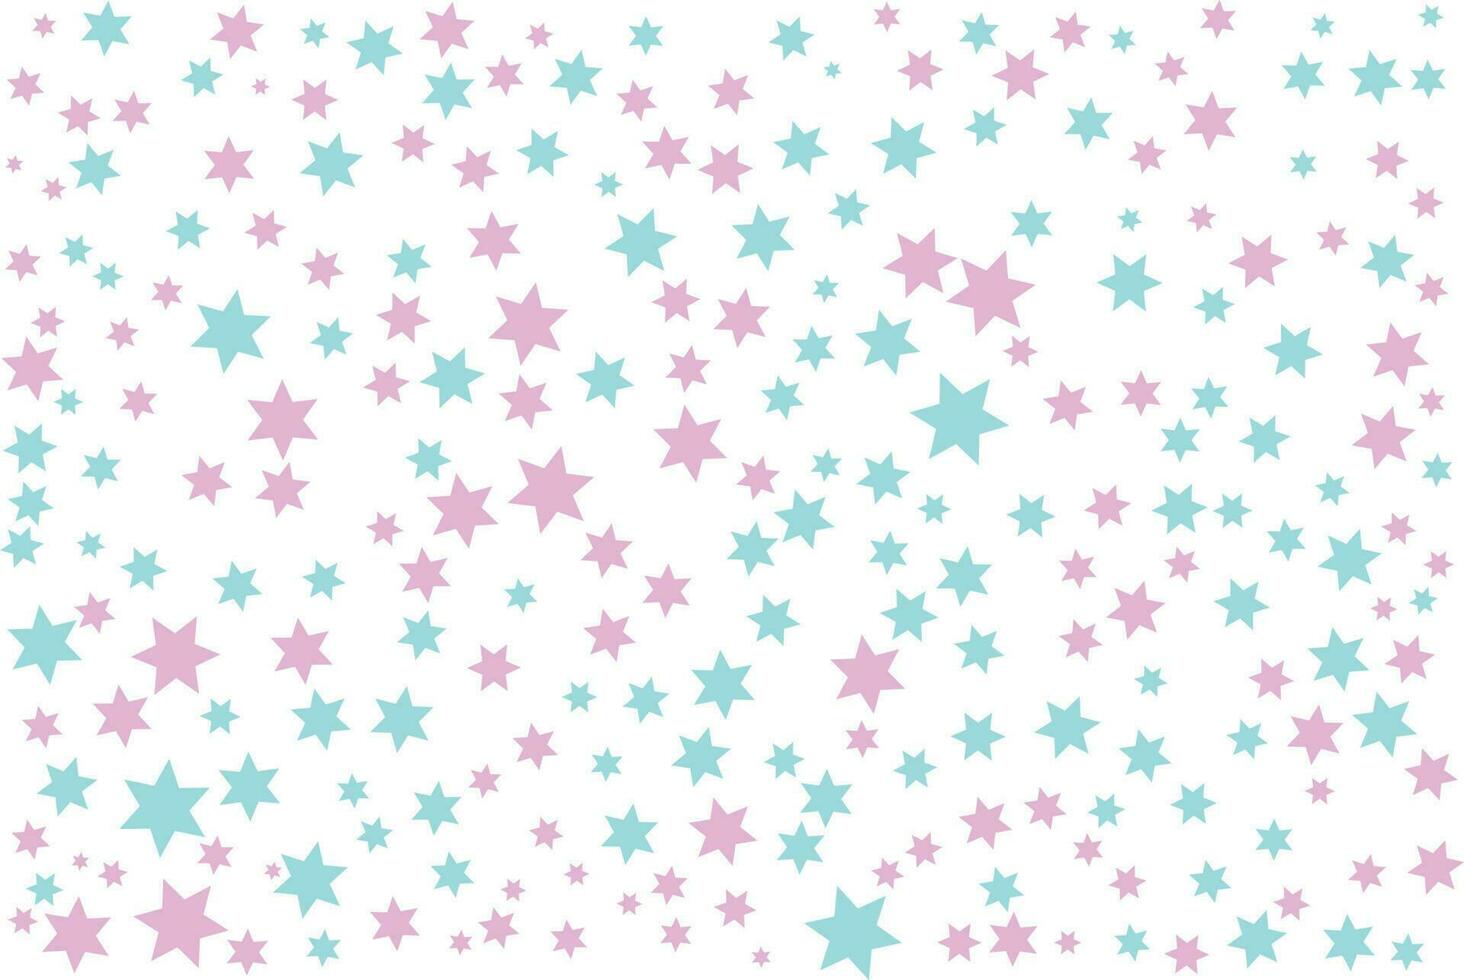 Pink and blue stars pattern on white background vector